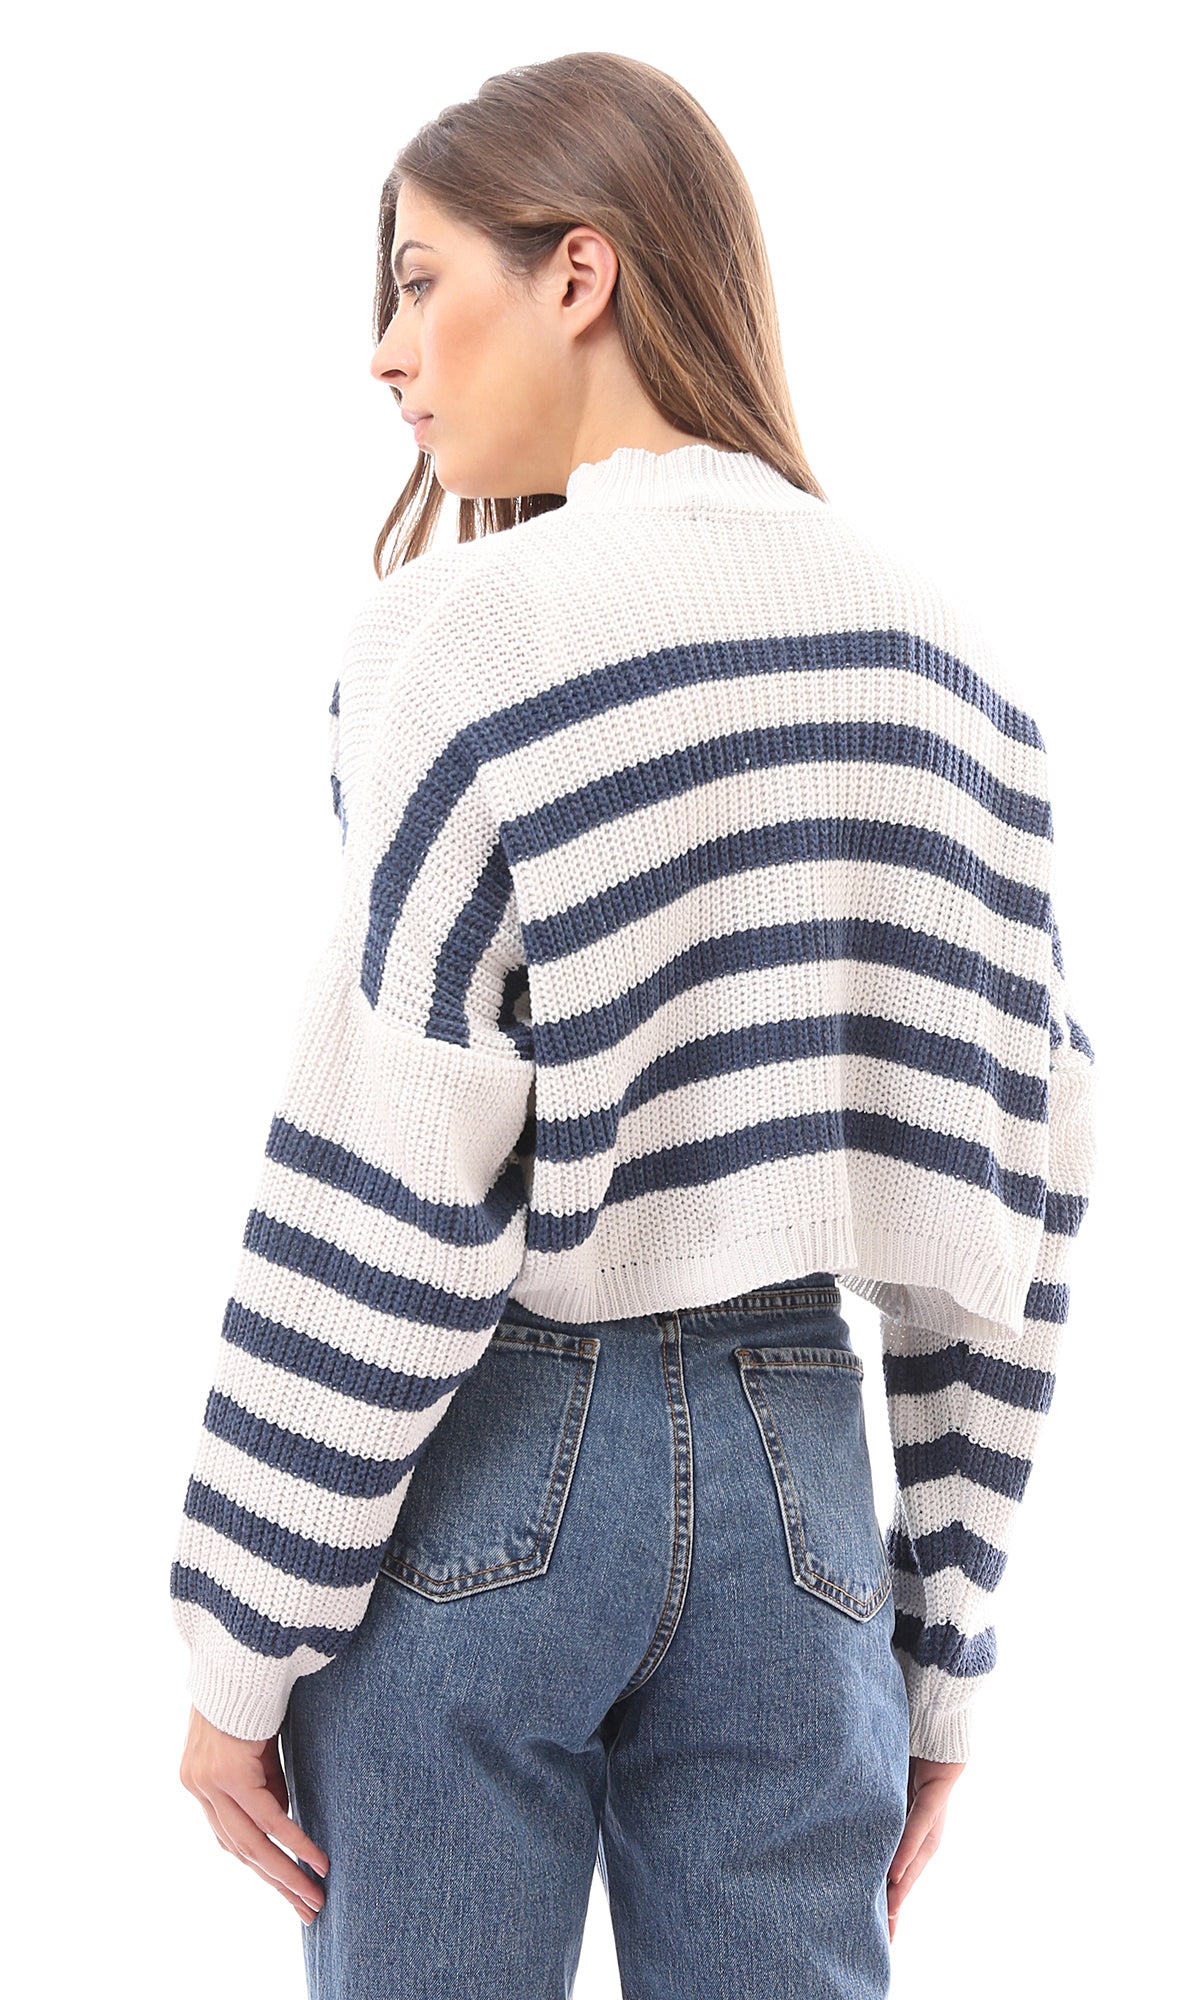 O169841 Chunky Knit With Stripes Navy Blue & Off-White Pullover